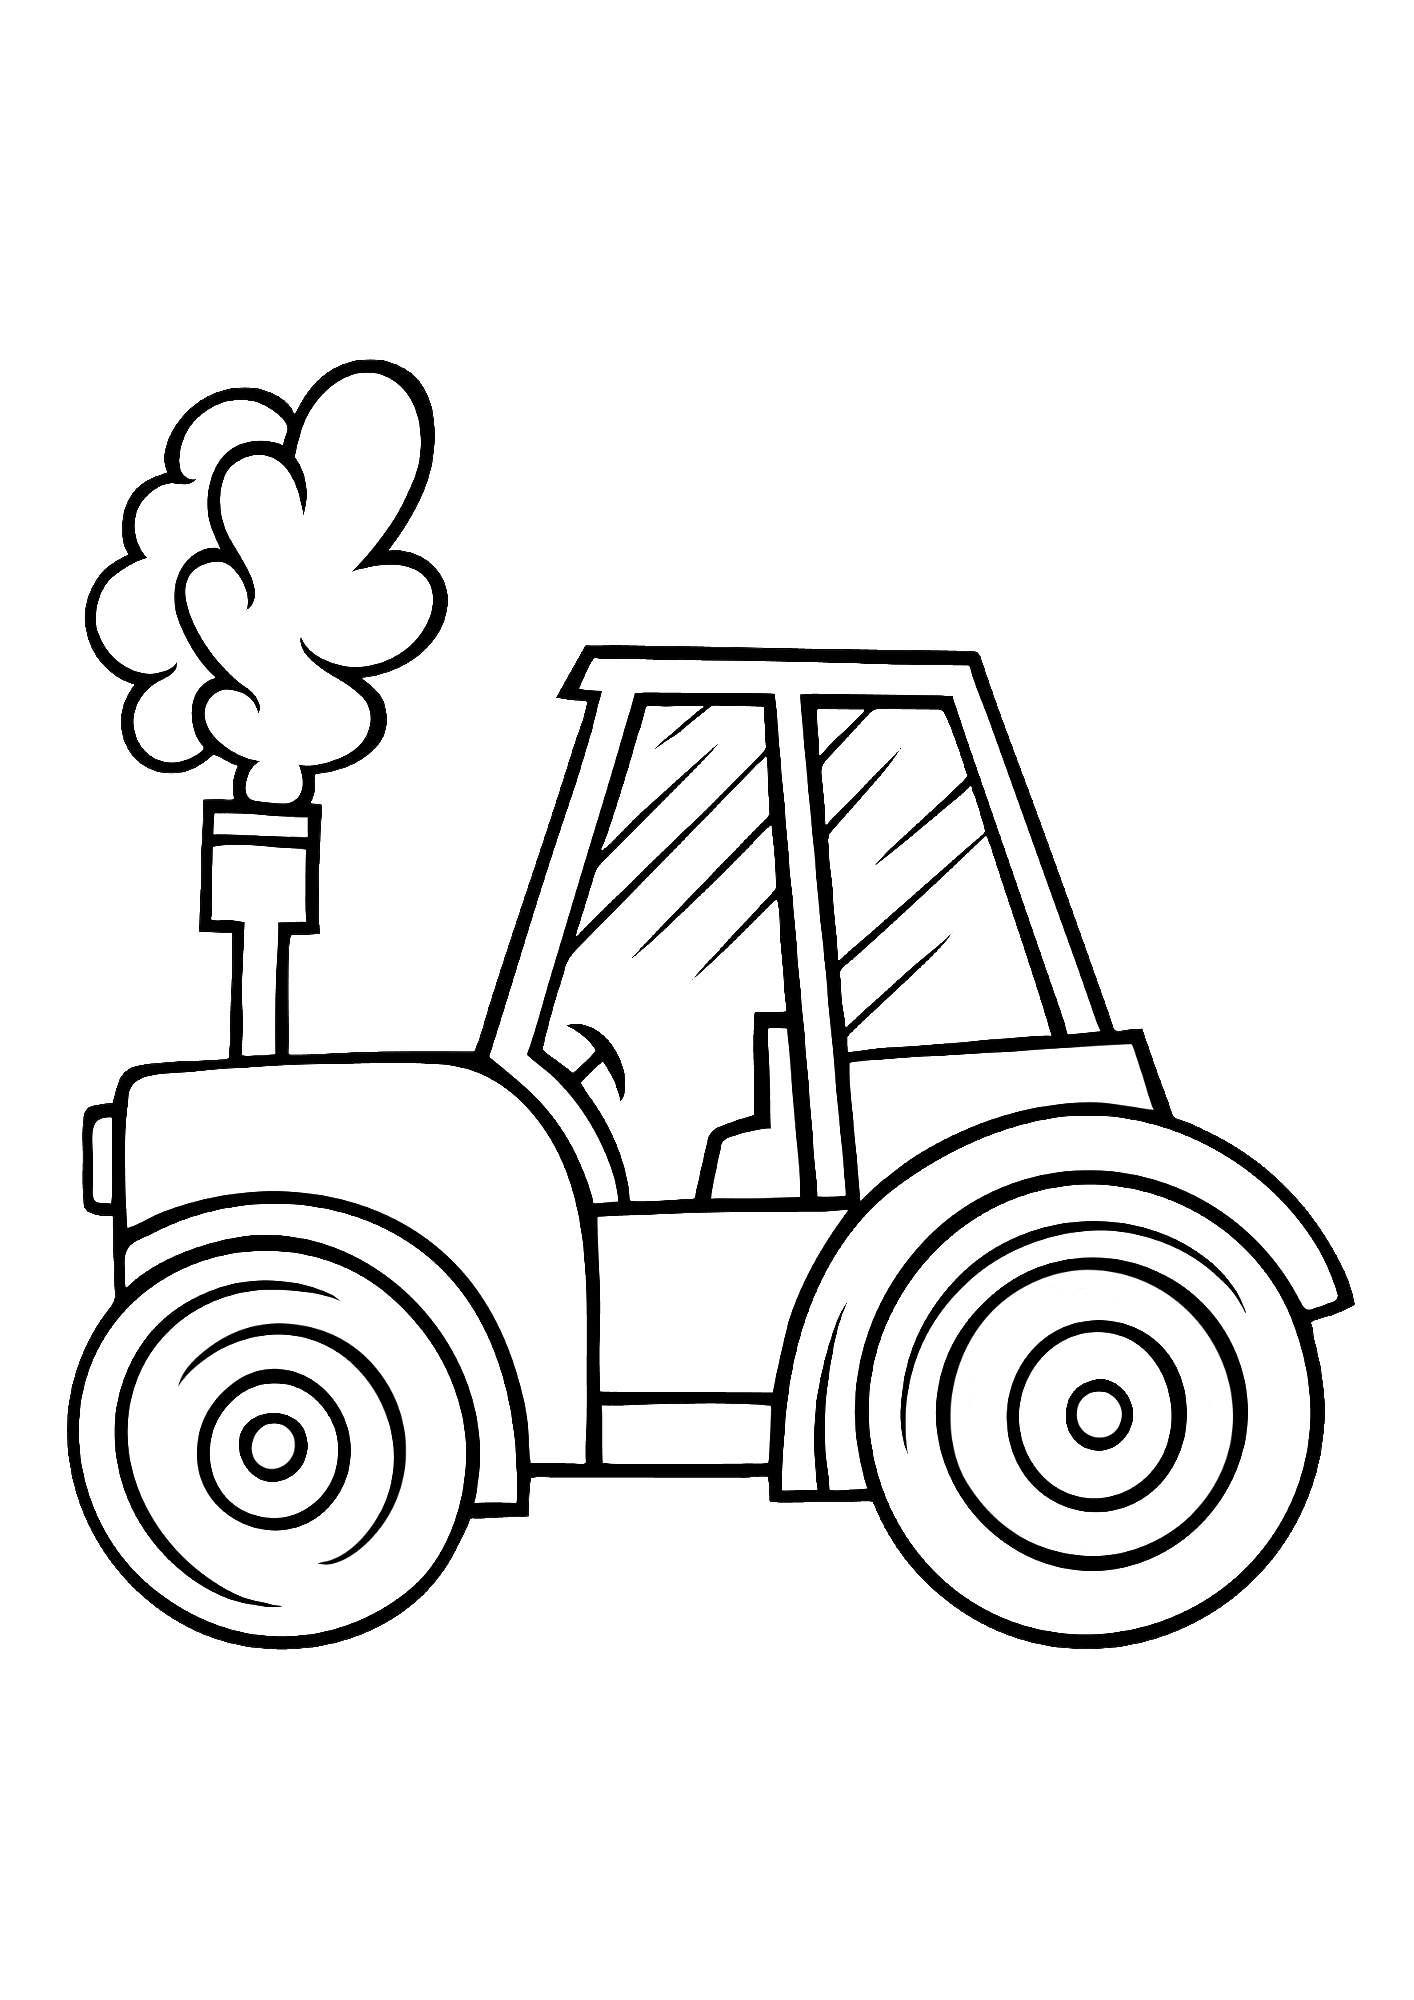 Tractor Image Coloring Pages To Print